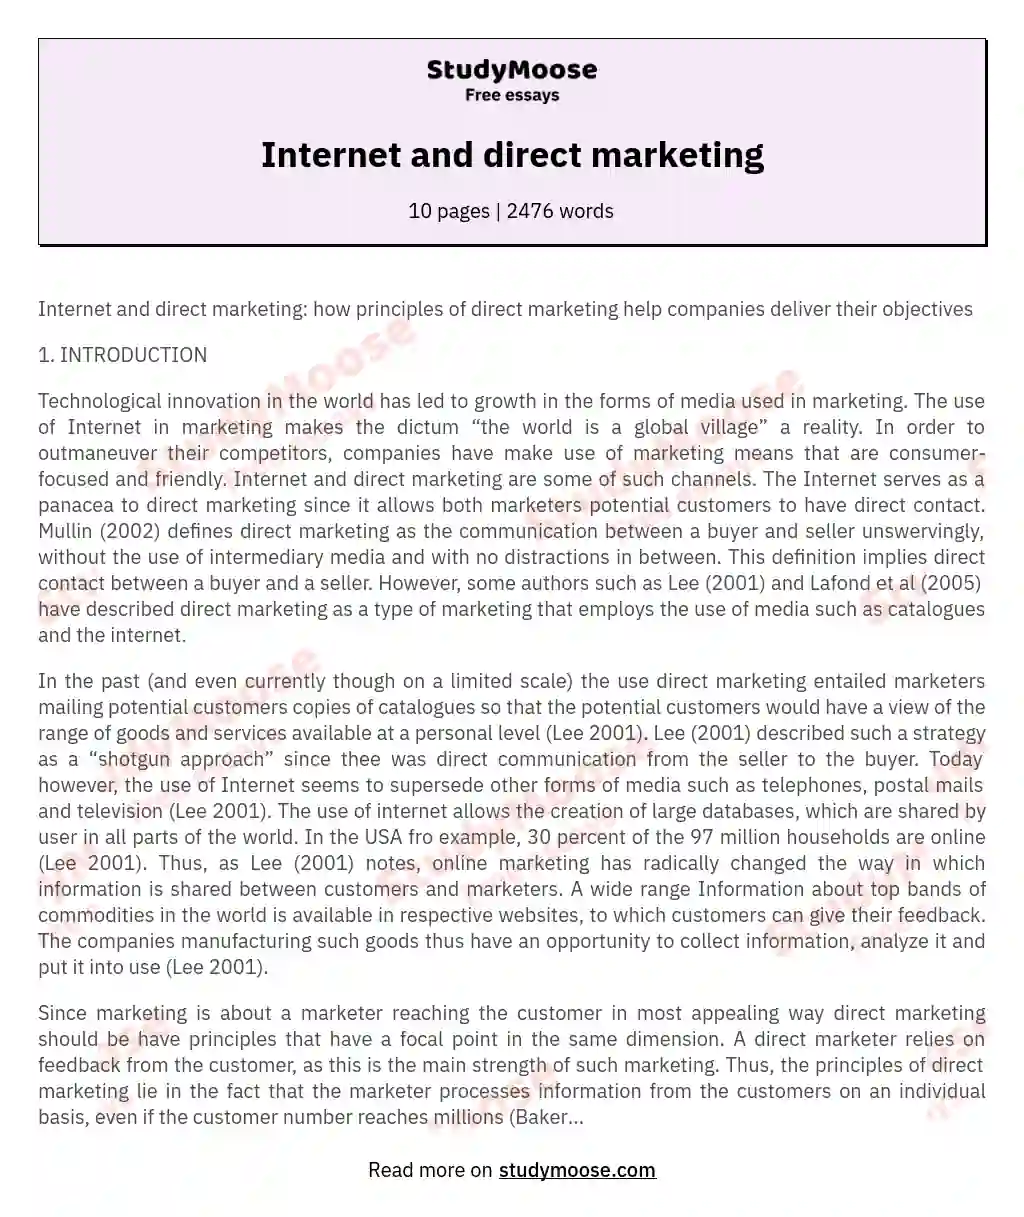 Internet and direct marketing